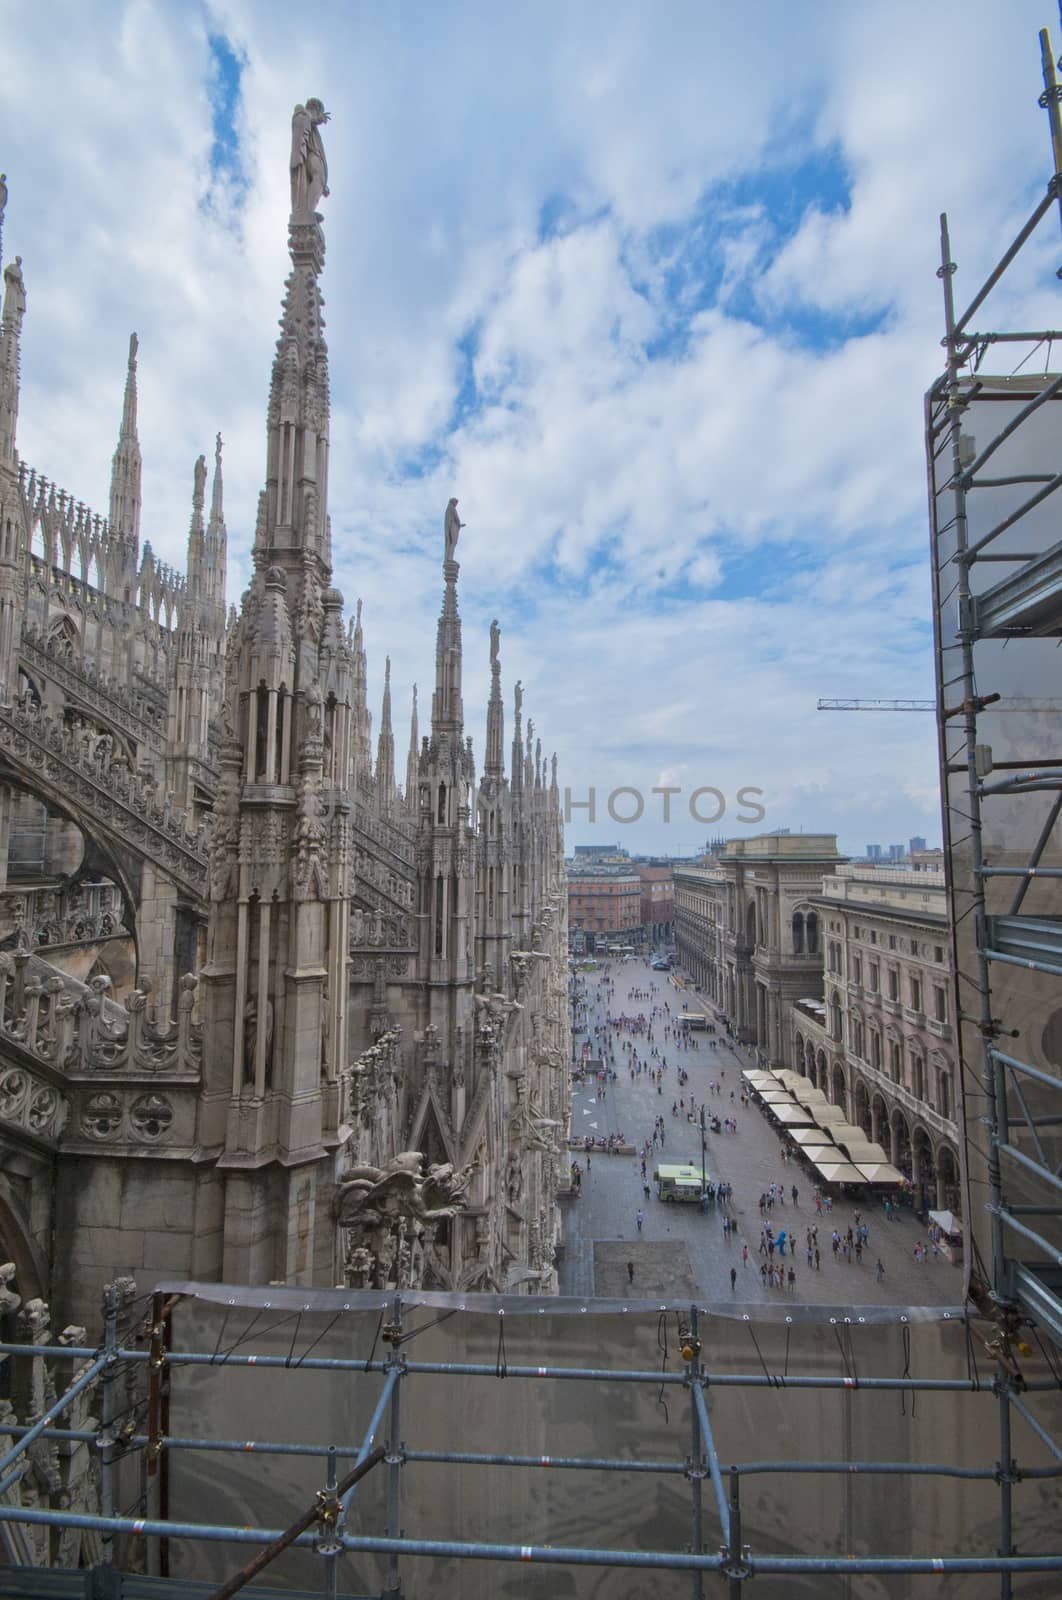 Duomo di Milano. Milan Cathedral - one of the main attractions of Lombardia capital